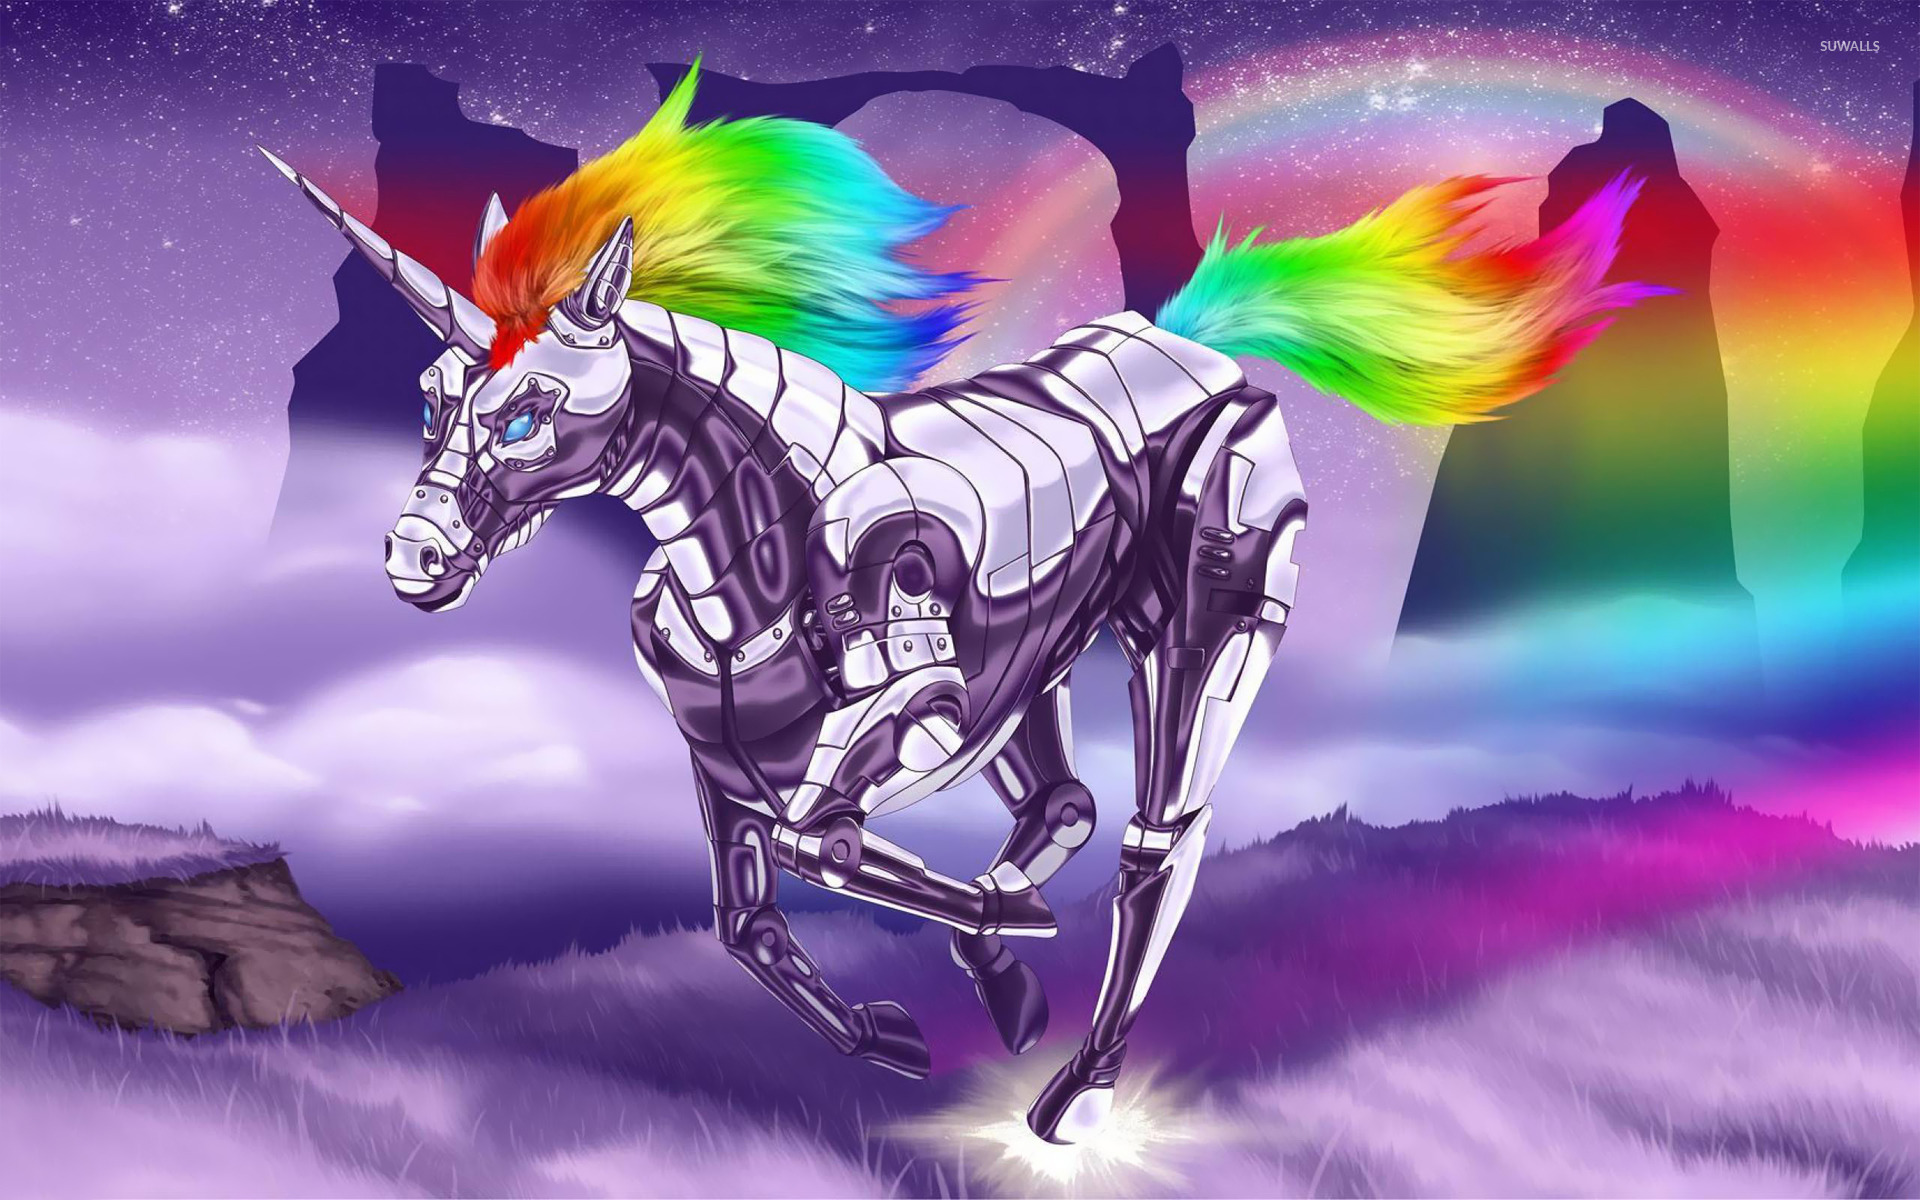 Robot Unicorn Attack Wallpaper Game Wallpapers 15846